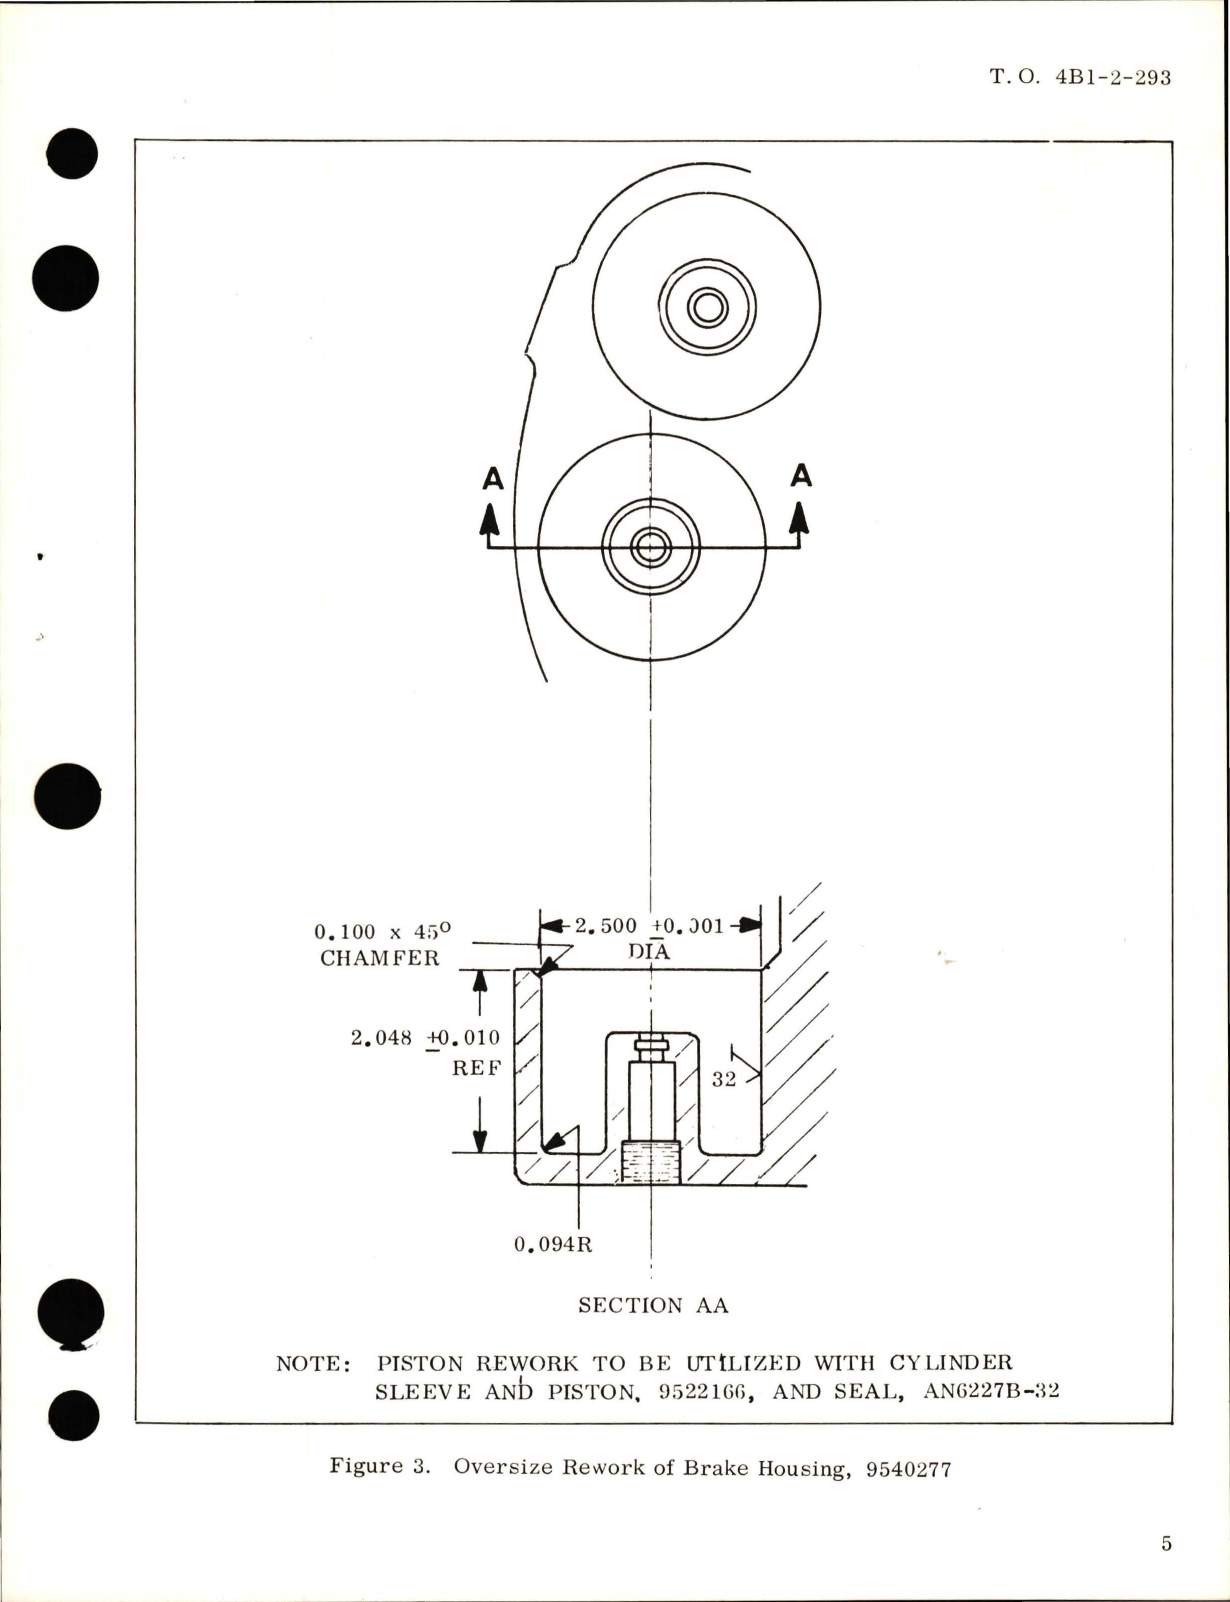 Sample page 5 from AirCorps Library document: Overhaul with Parts Breakdown for Hydraulic Brake for Main Wheel - 26 x 6.6 - Part 9540726